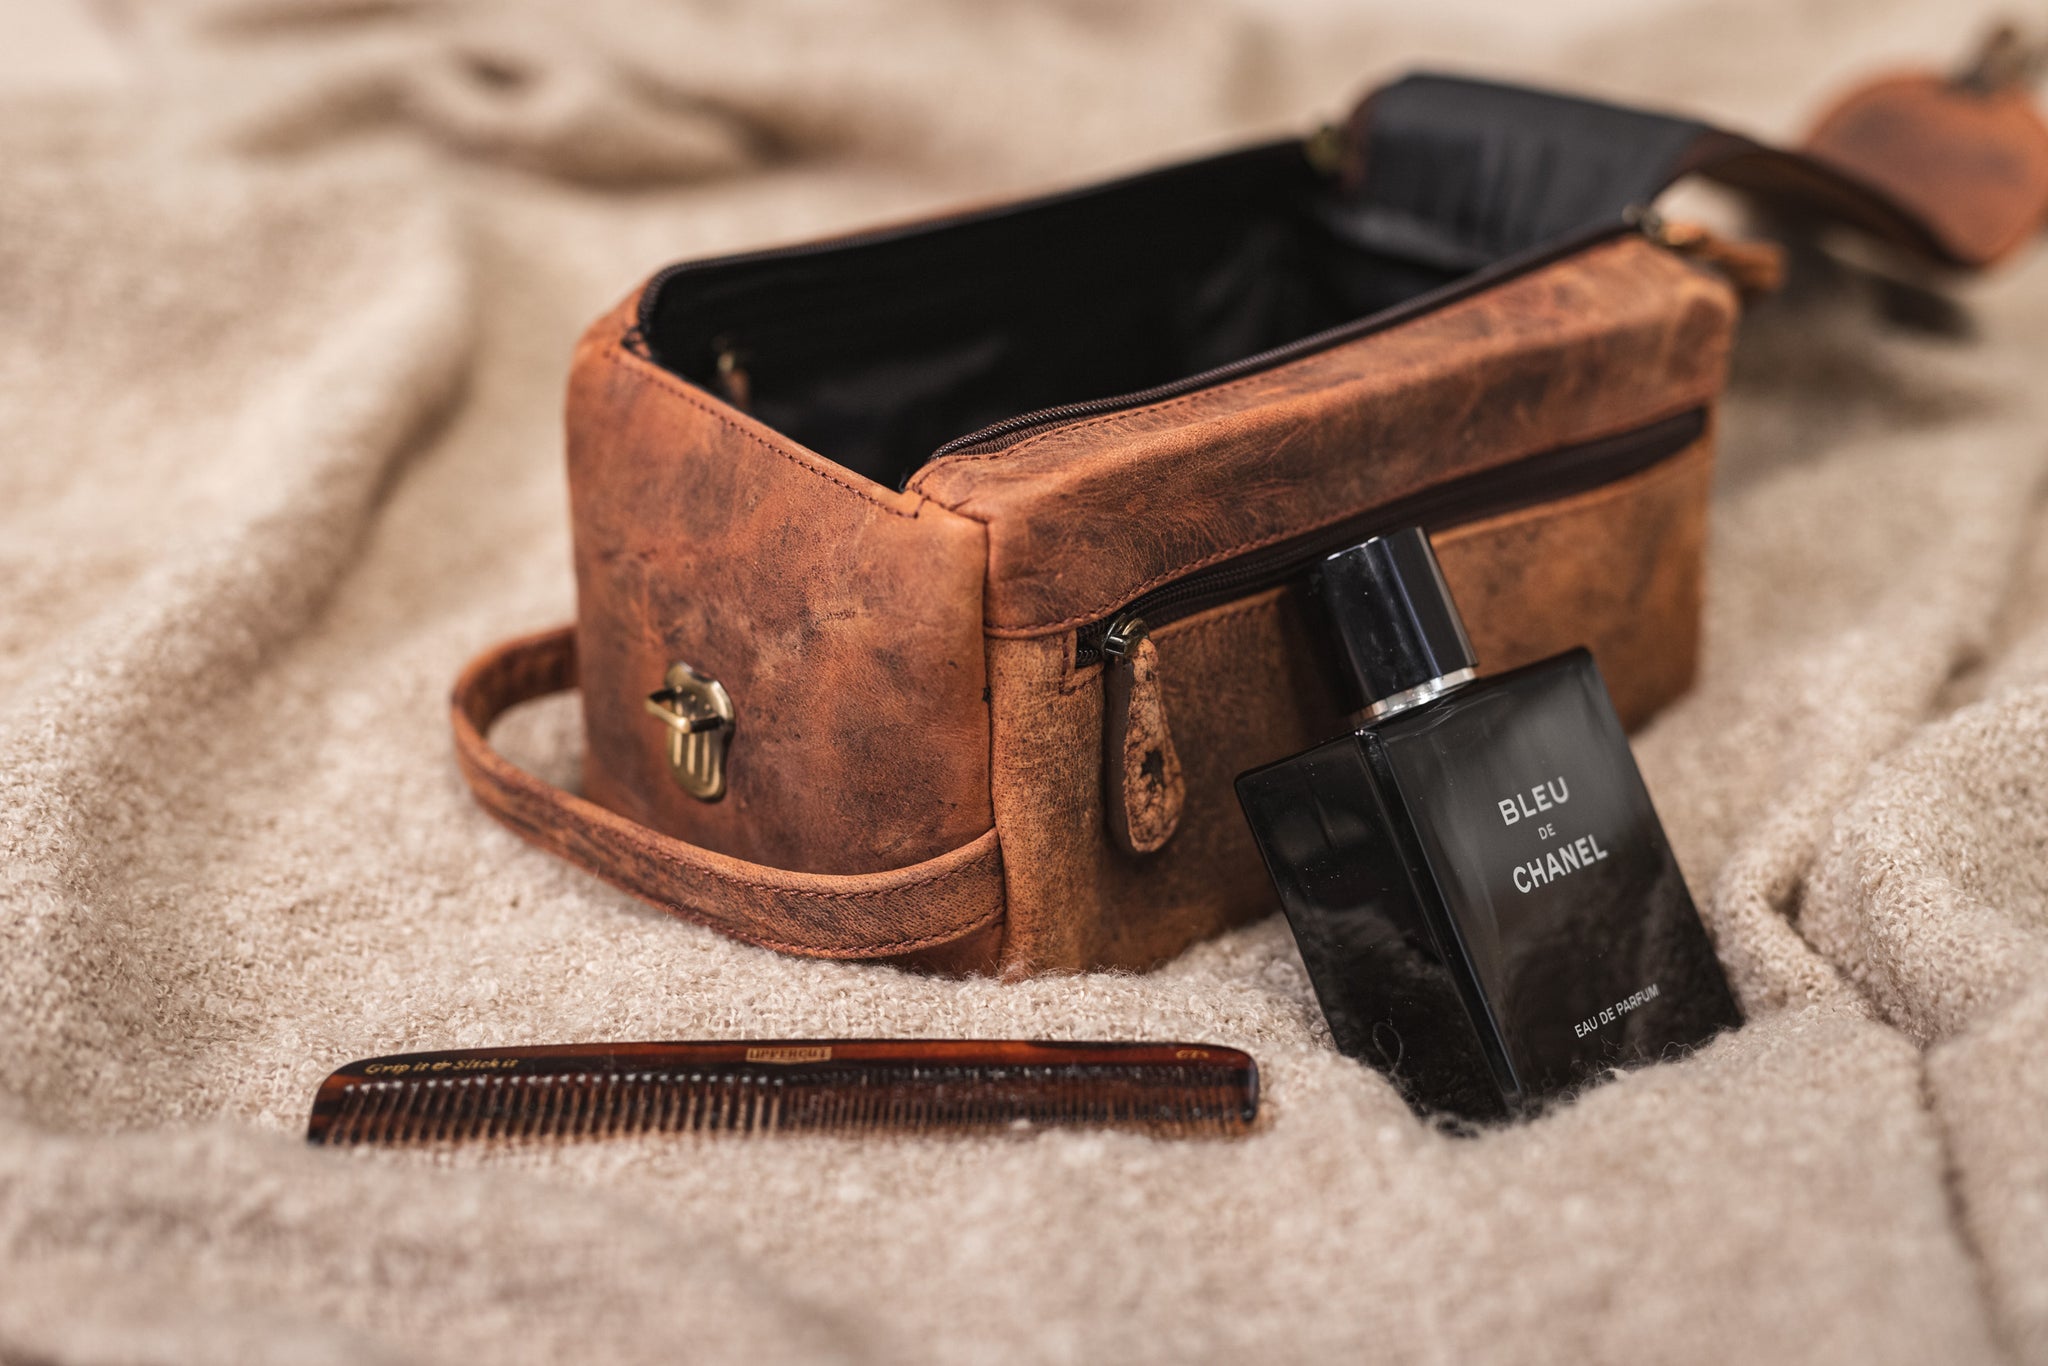 How to use a mens toiletry bag for business travels?